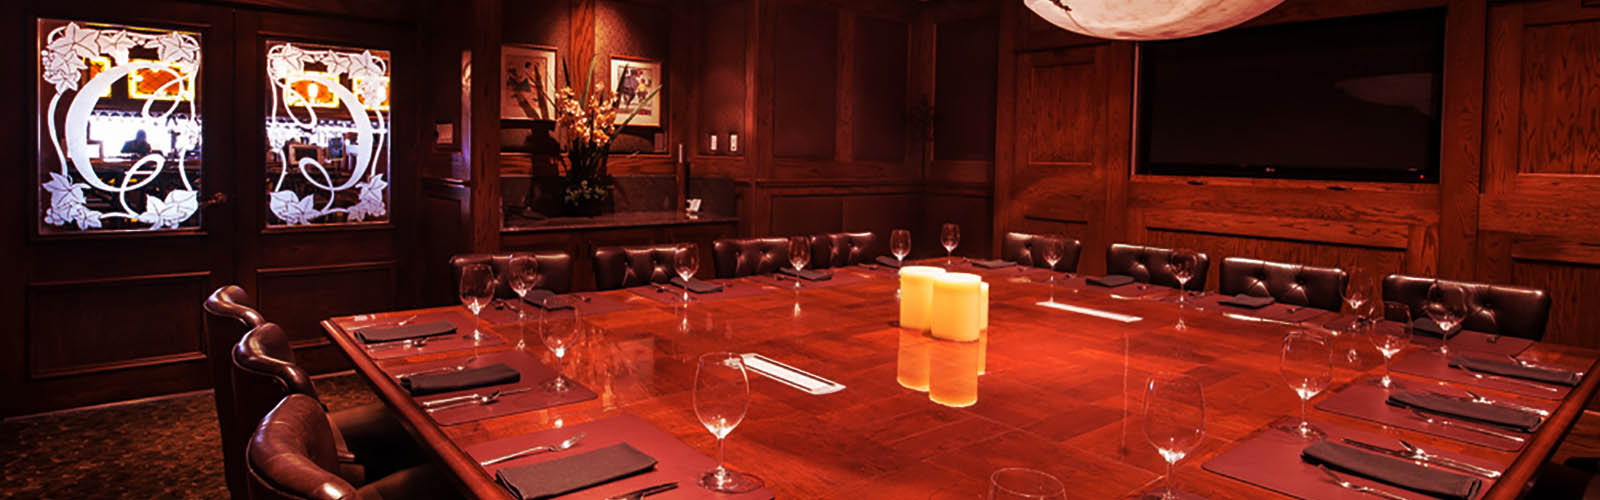 Crest Hotel board room with conference table and TV